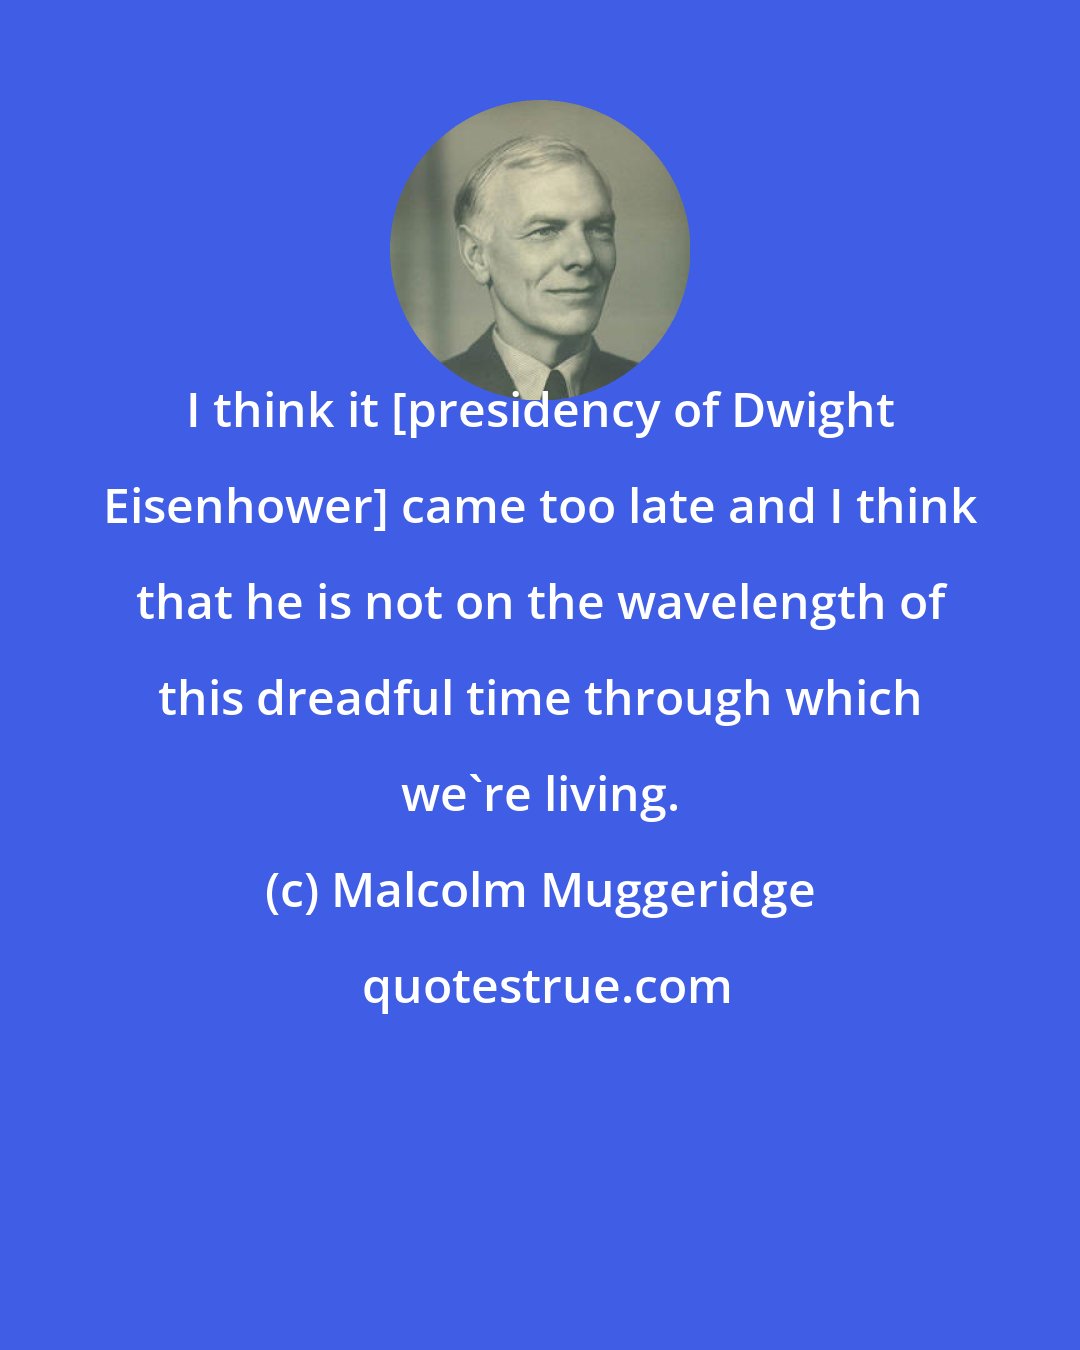 Malcolm Muggeridge: I think it [presidency of Dwight Eisenhower] came too late and I think that he is not on the wavelength of this dreadful time through which we're living.